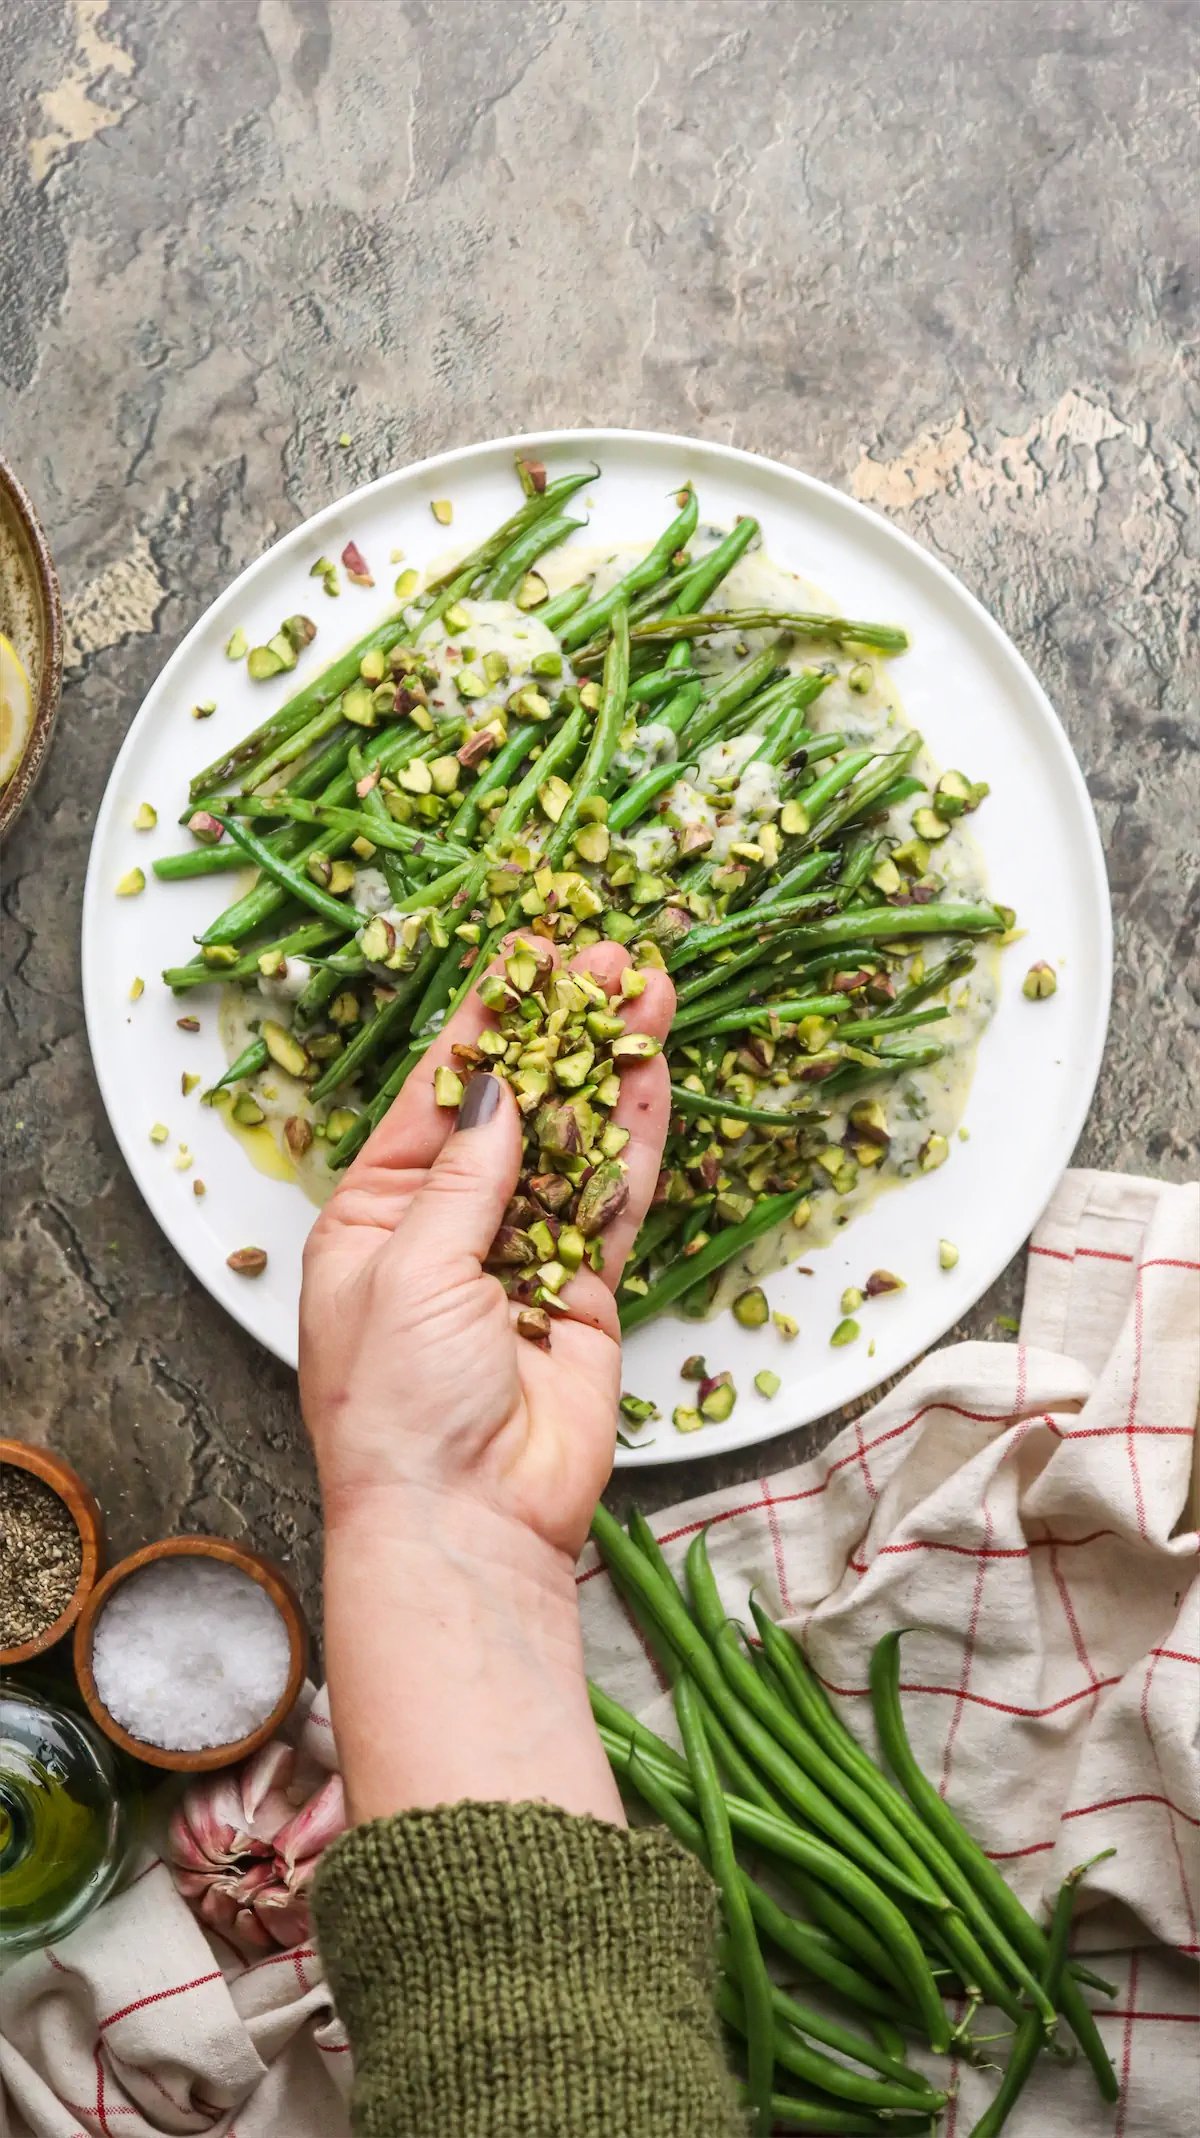 A hand sprinkling crushed pistachio over the plate of green beans with yogurt and mint dressing.